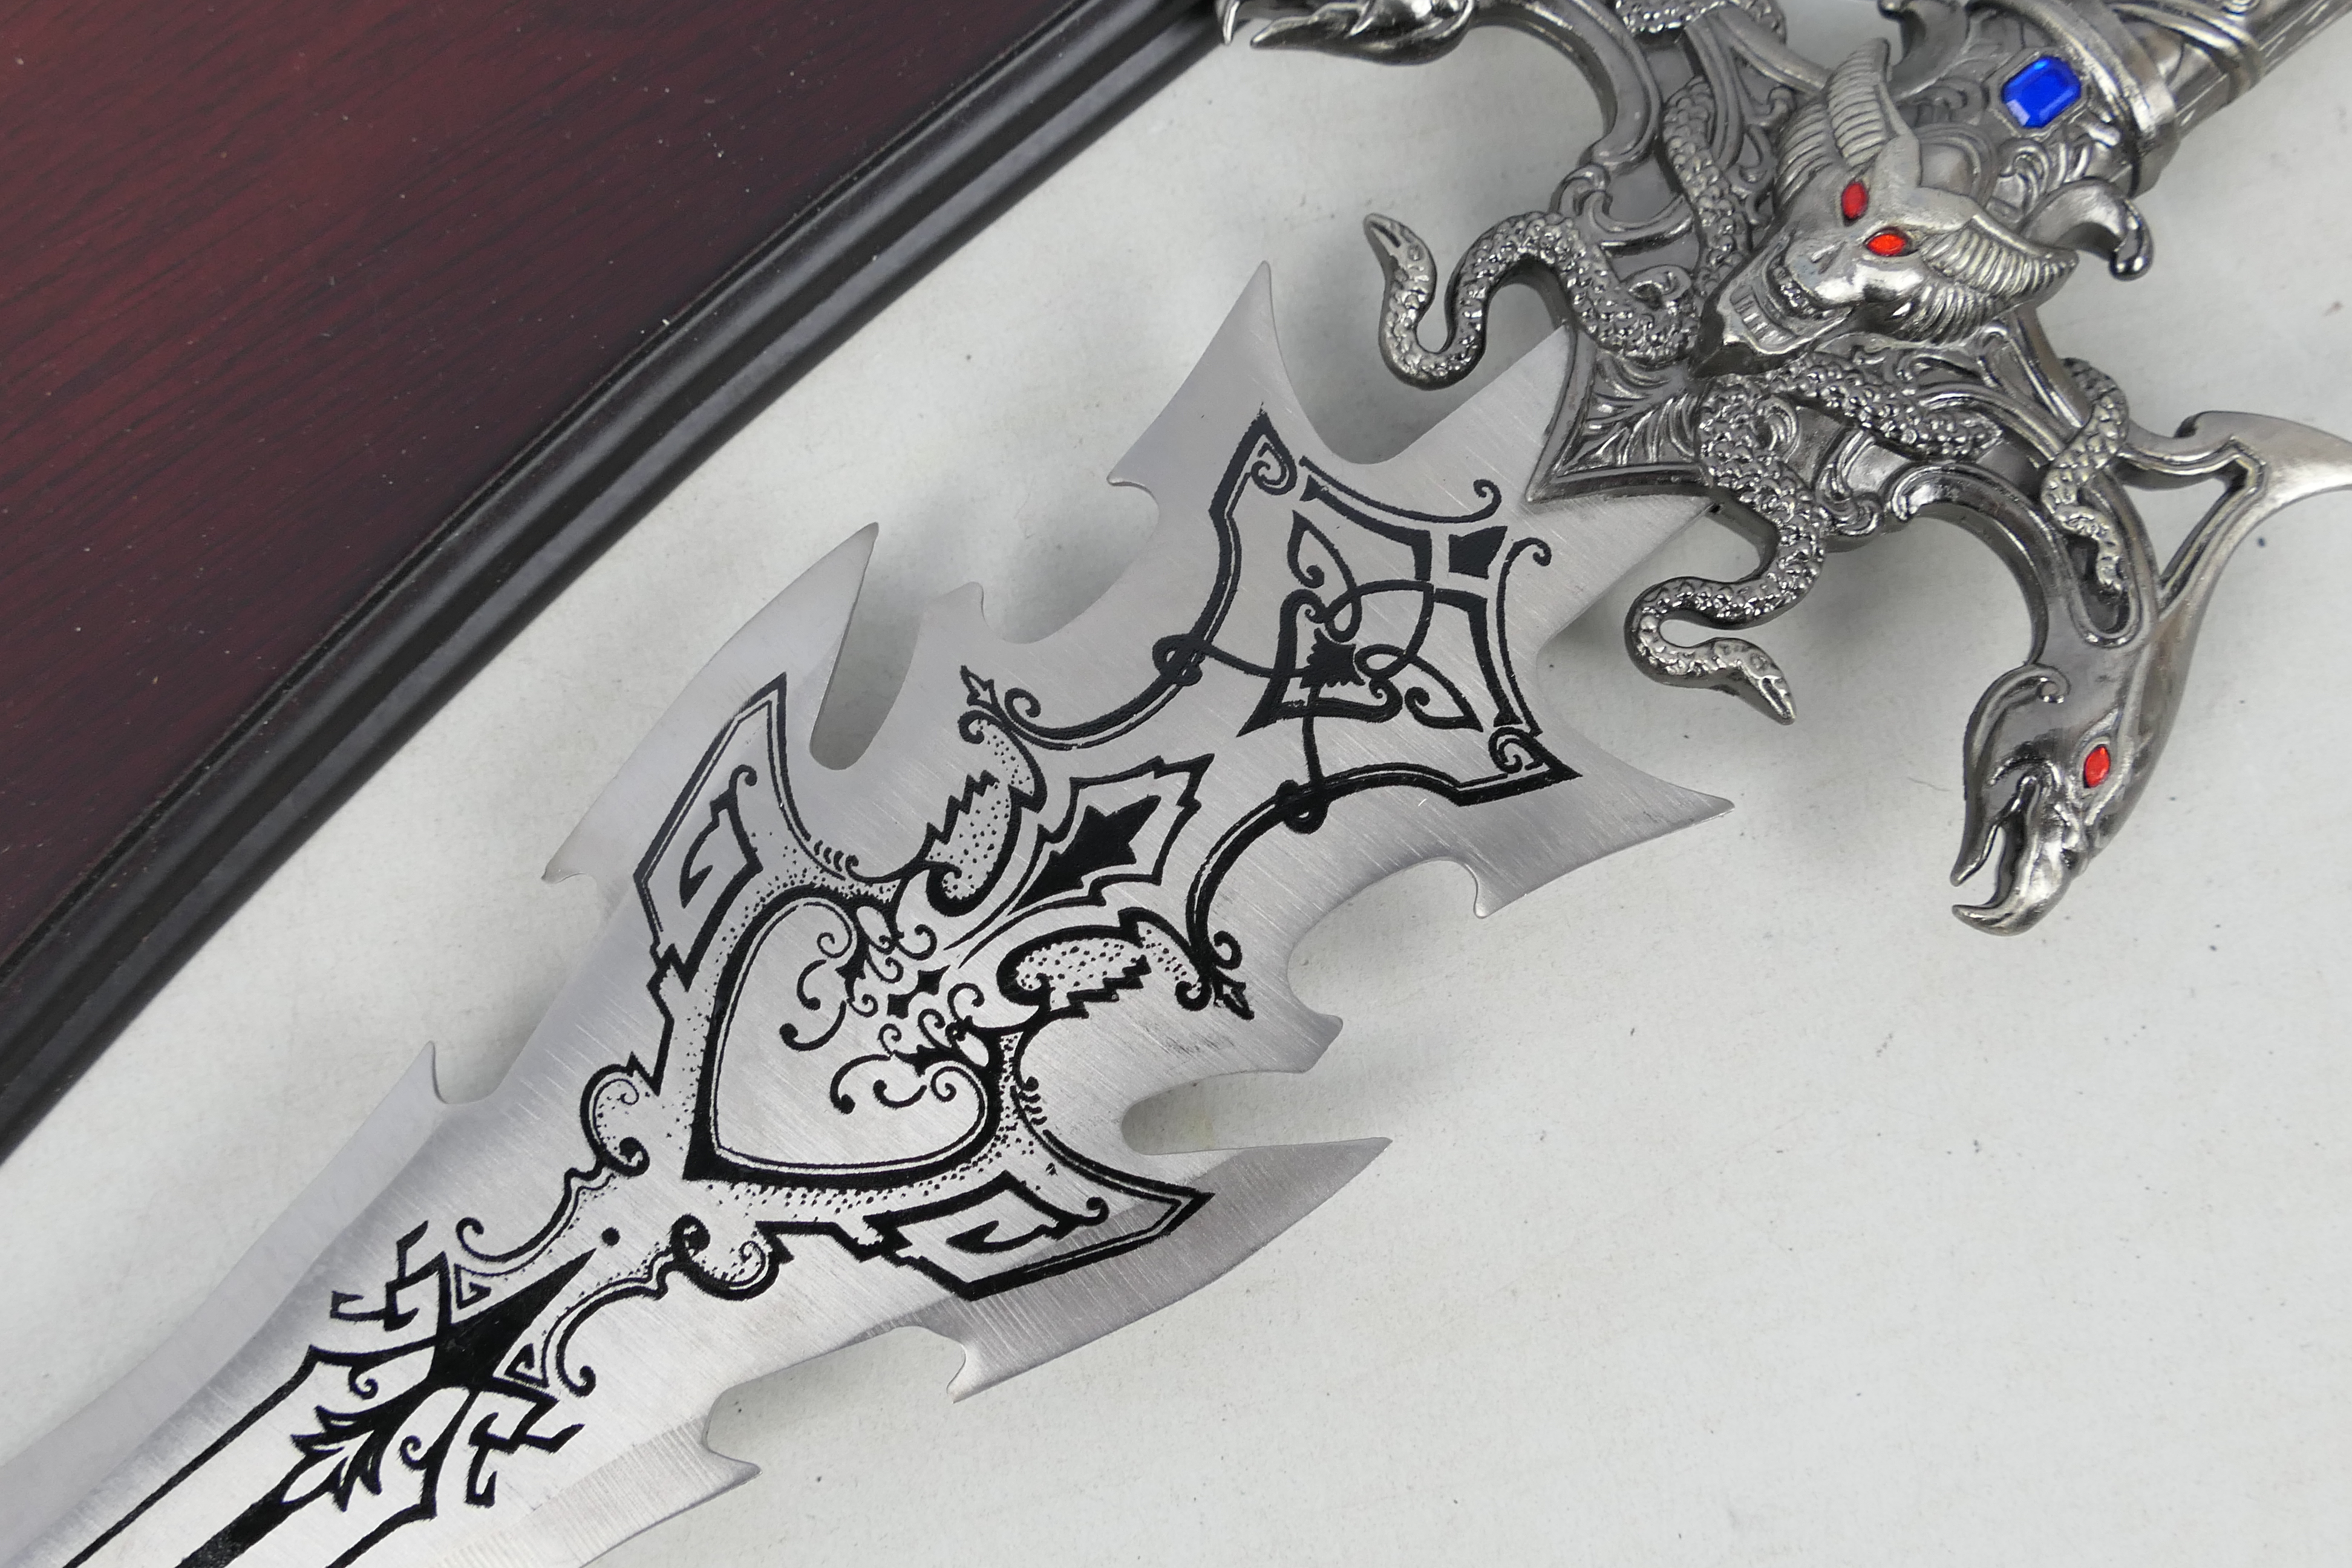 A decorative Fantasy sword / dagger with display board, approximately 63 cm (l). - Image 3 of 4